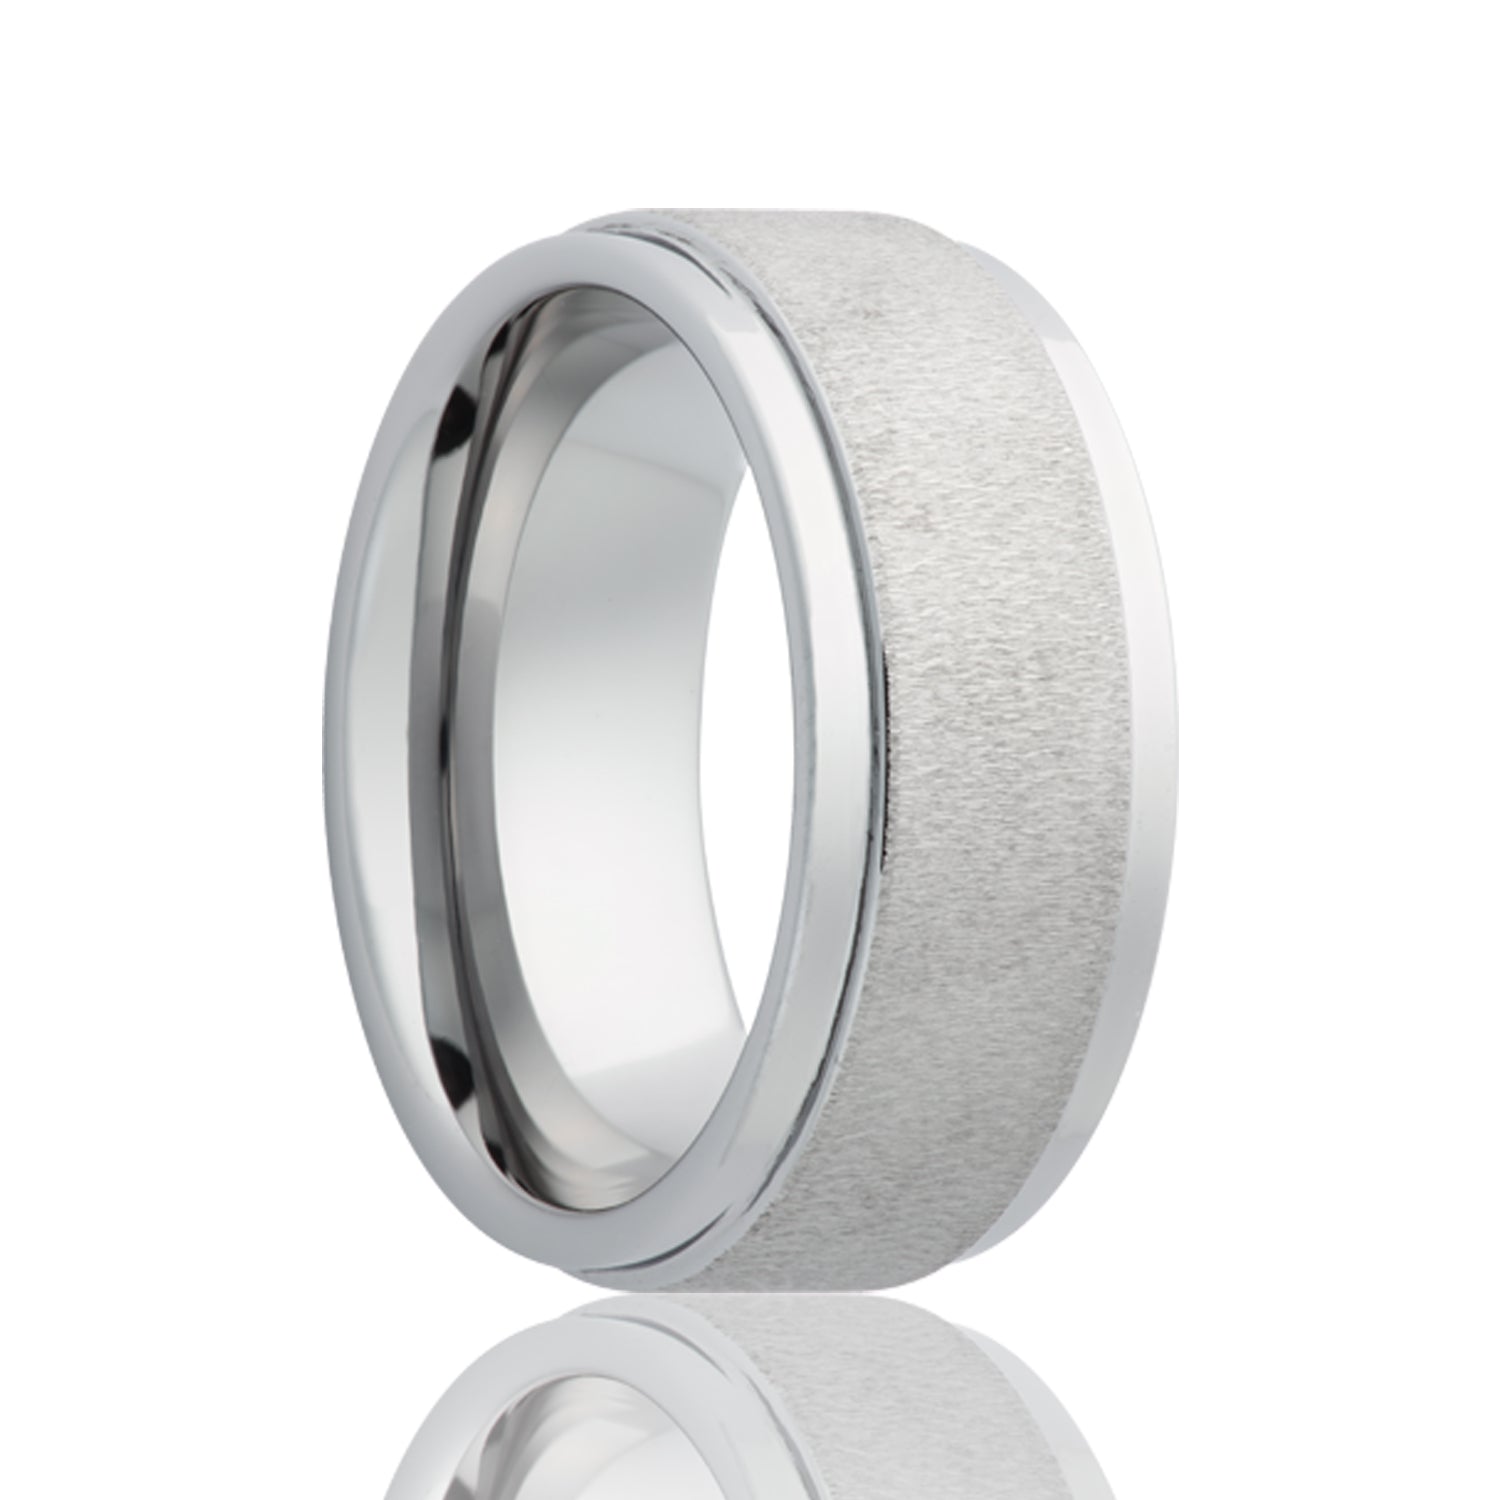 A textured finish tungsten wedding band with stepped edges displayed on a neutral white background.